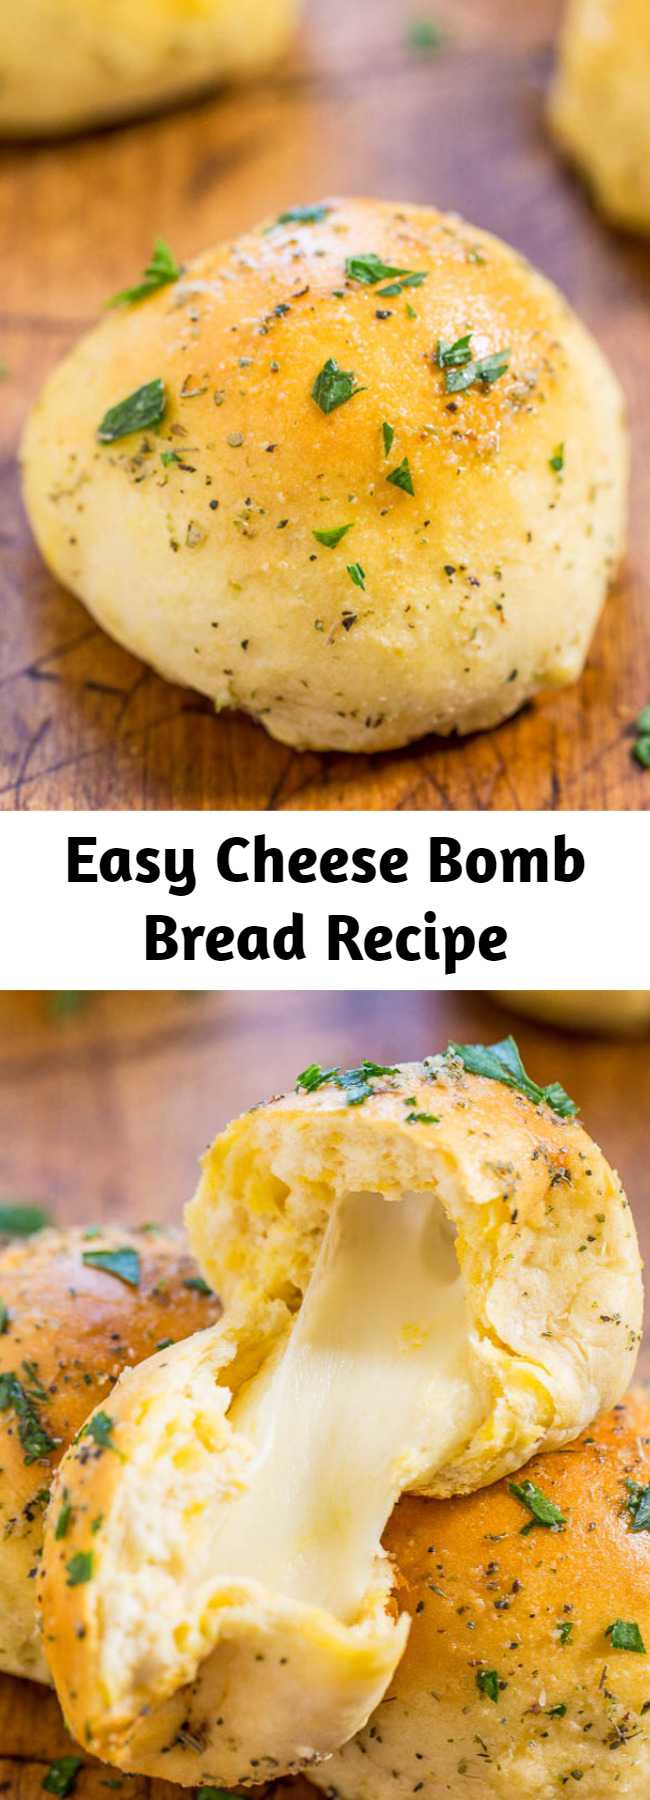 Easy Cheese Bomb Bread Recipe - Soft, buttery bread brushed with garlic butter and stuffed with CHEESE! So good, mindlessly easy, goofproof, and ready in 10 minutes! A hit with everyone!!